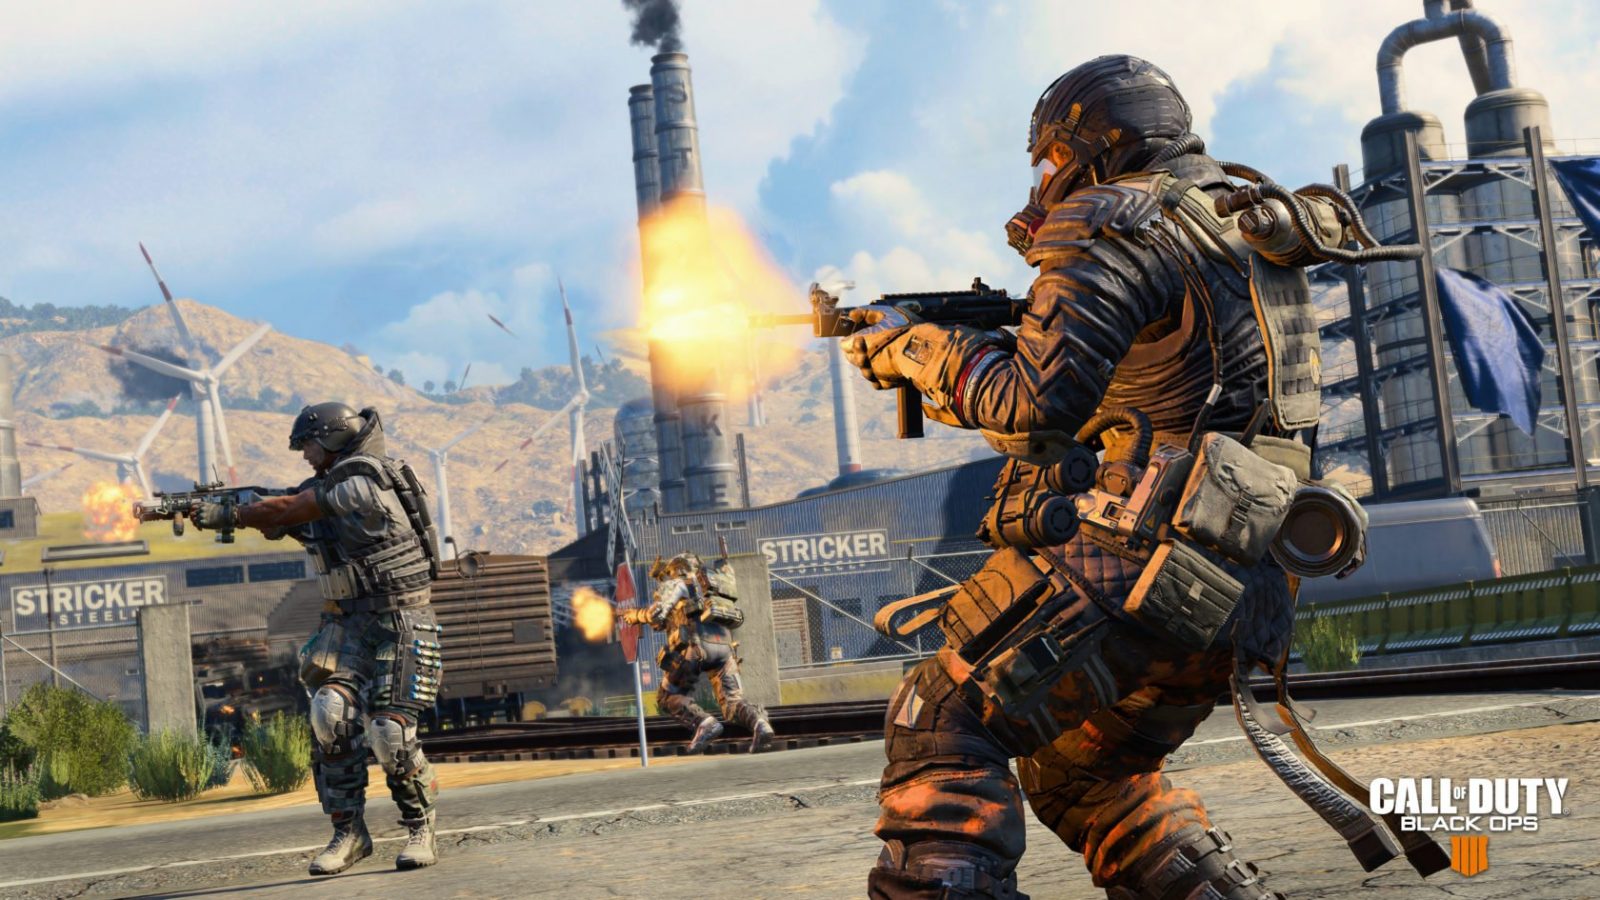 Call of Duty Black Ops 4 Blackout